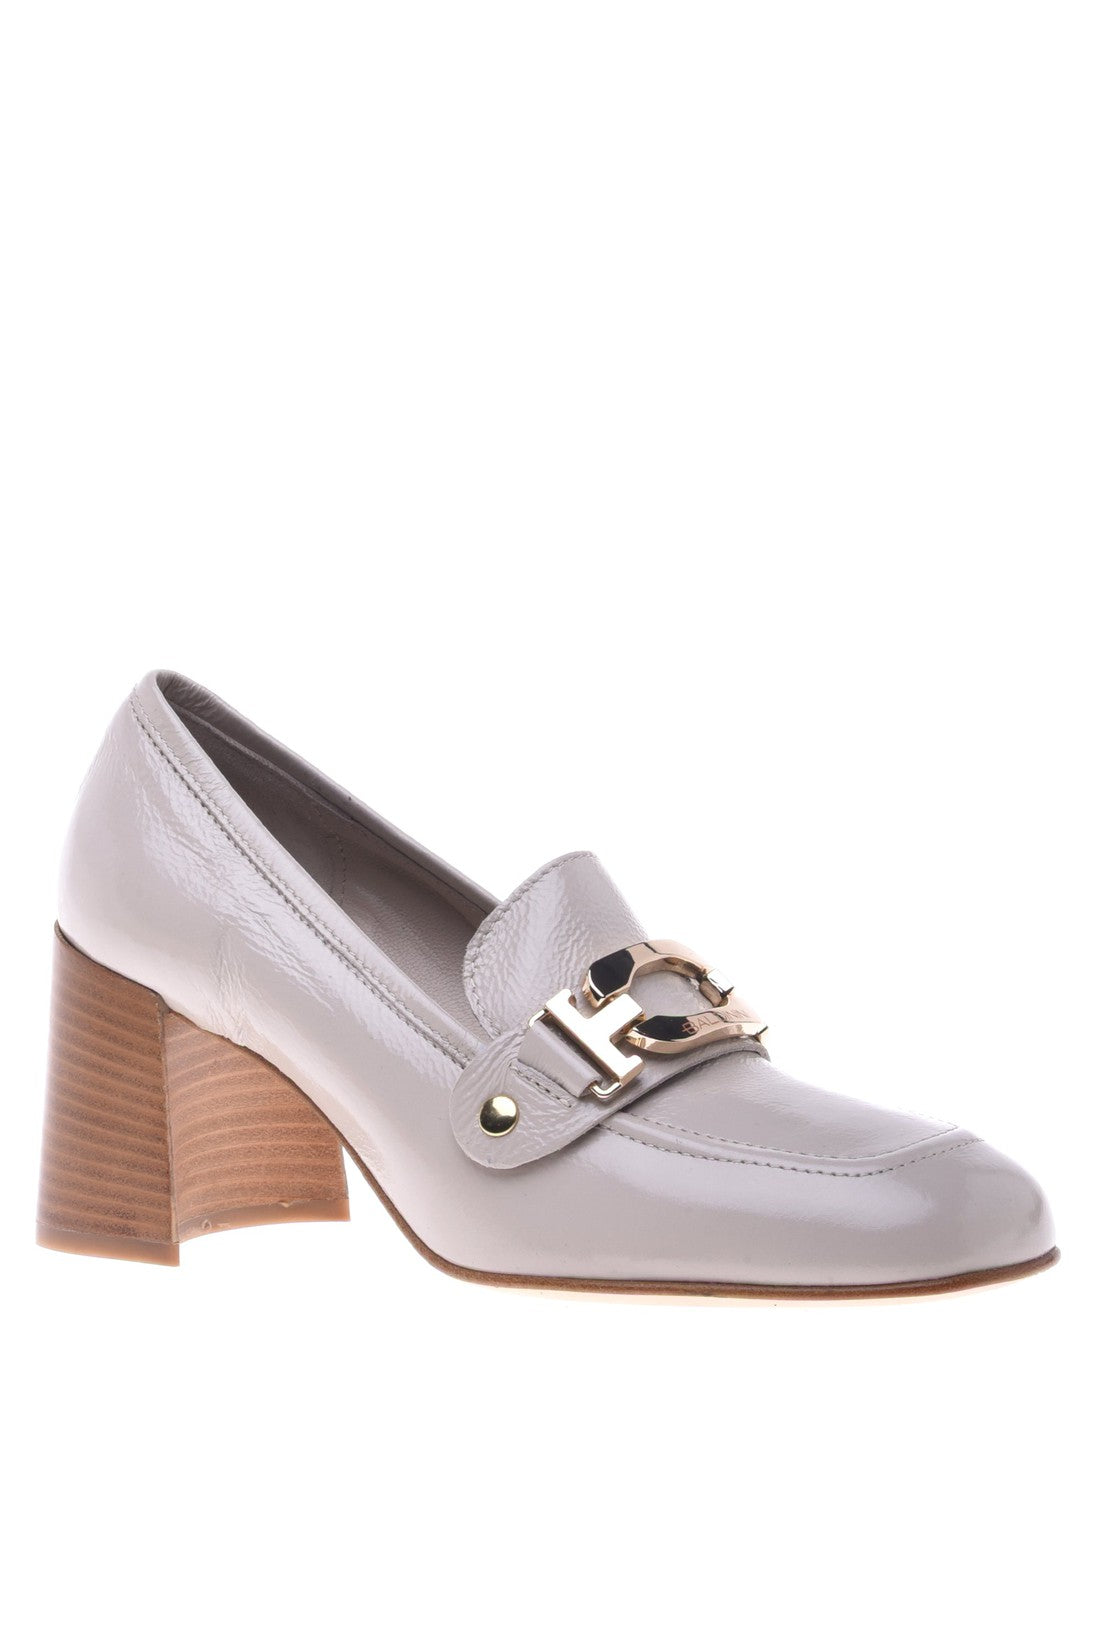 Loafer in cream naplak leather